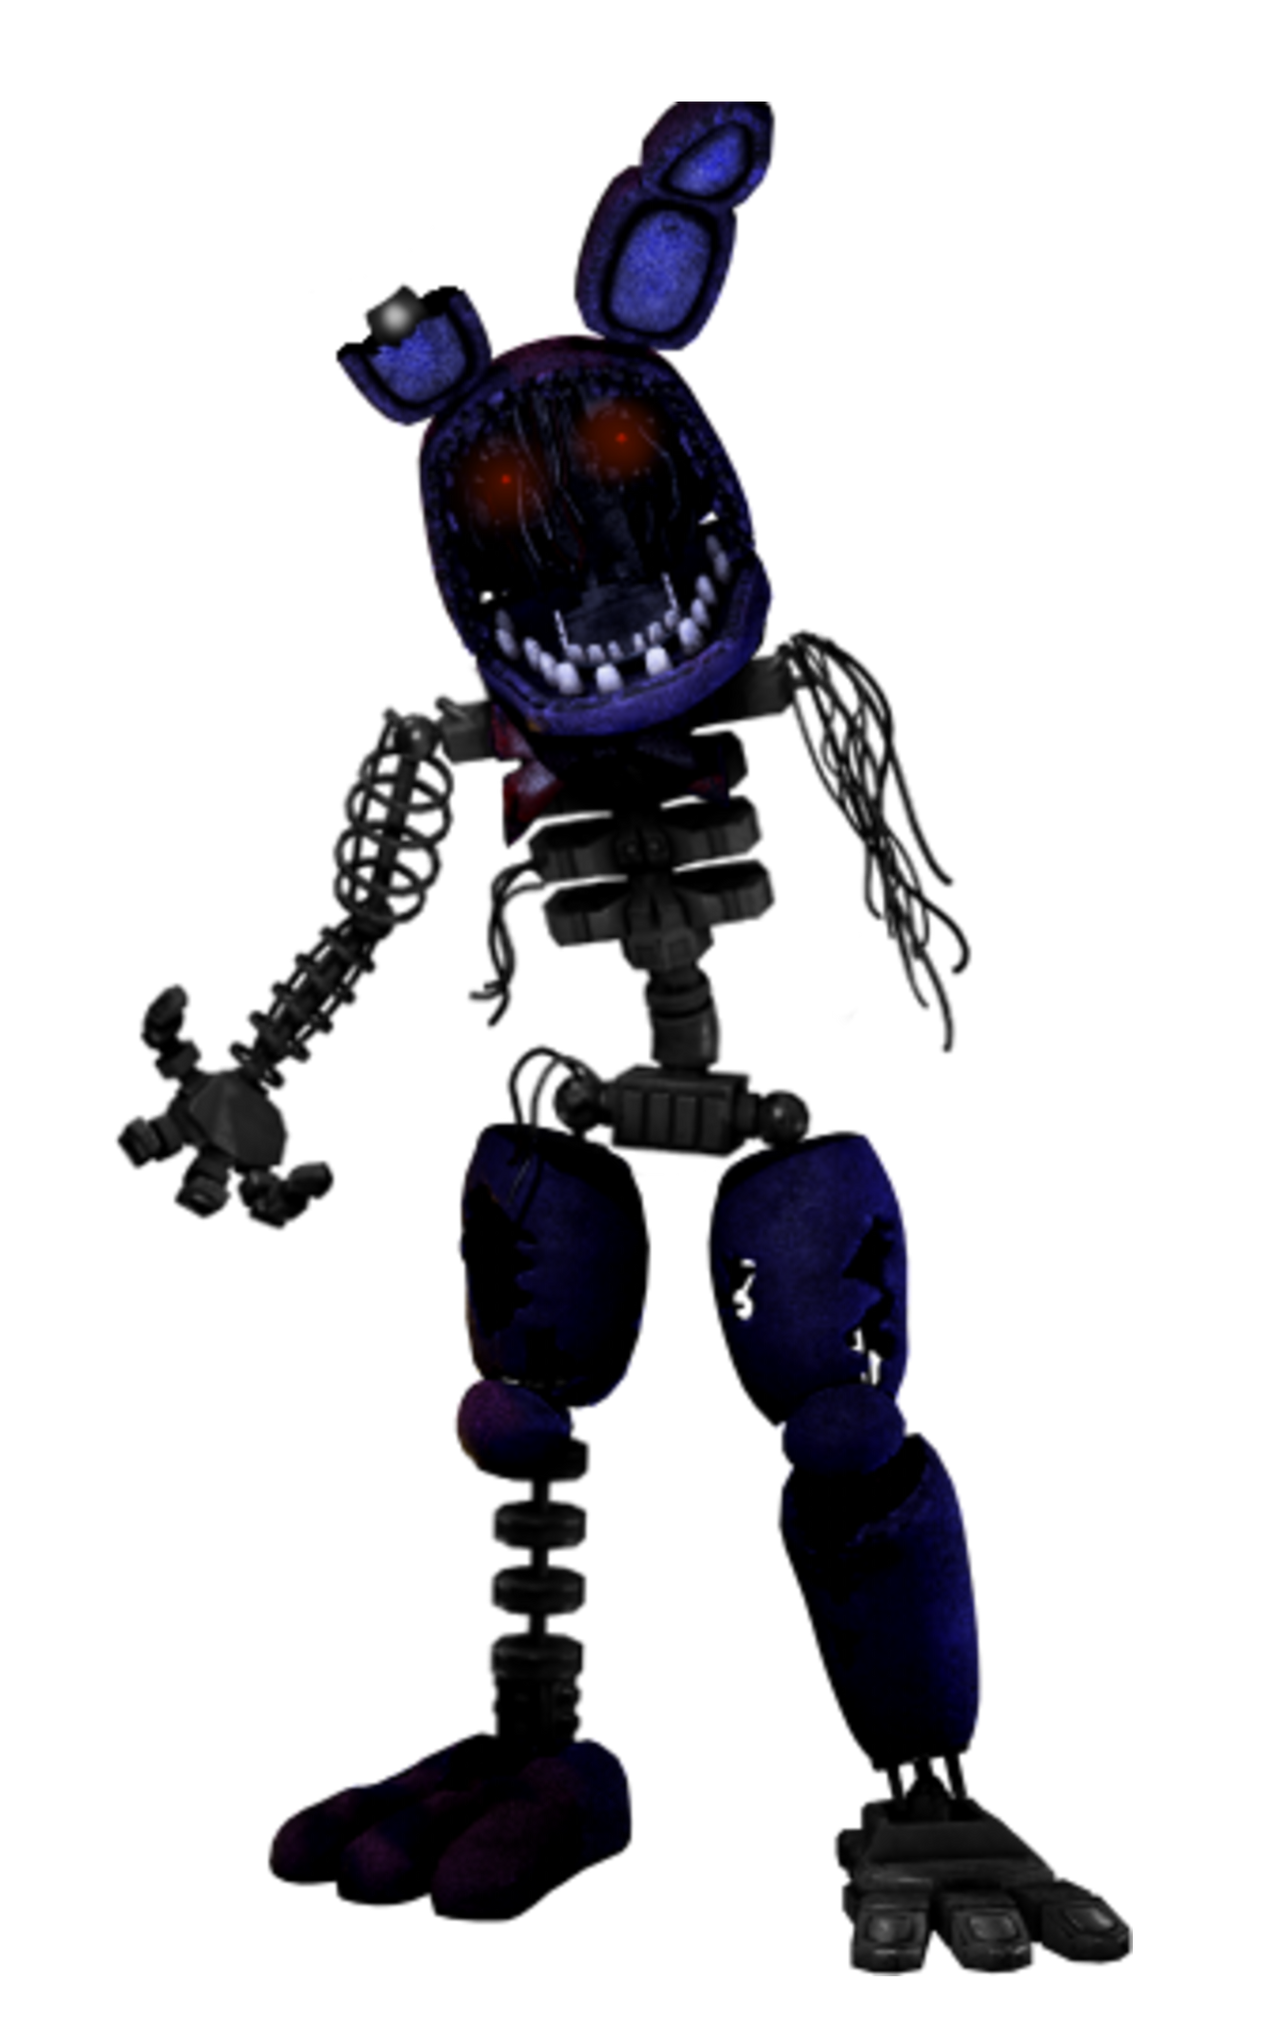 Five Nights At Freddy's 2 Endoskeleton Bonnie Wiki PNG, Clipart, Free PNG  Download